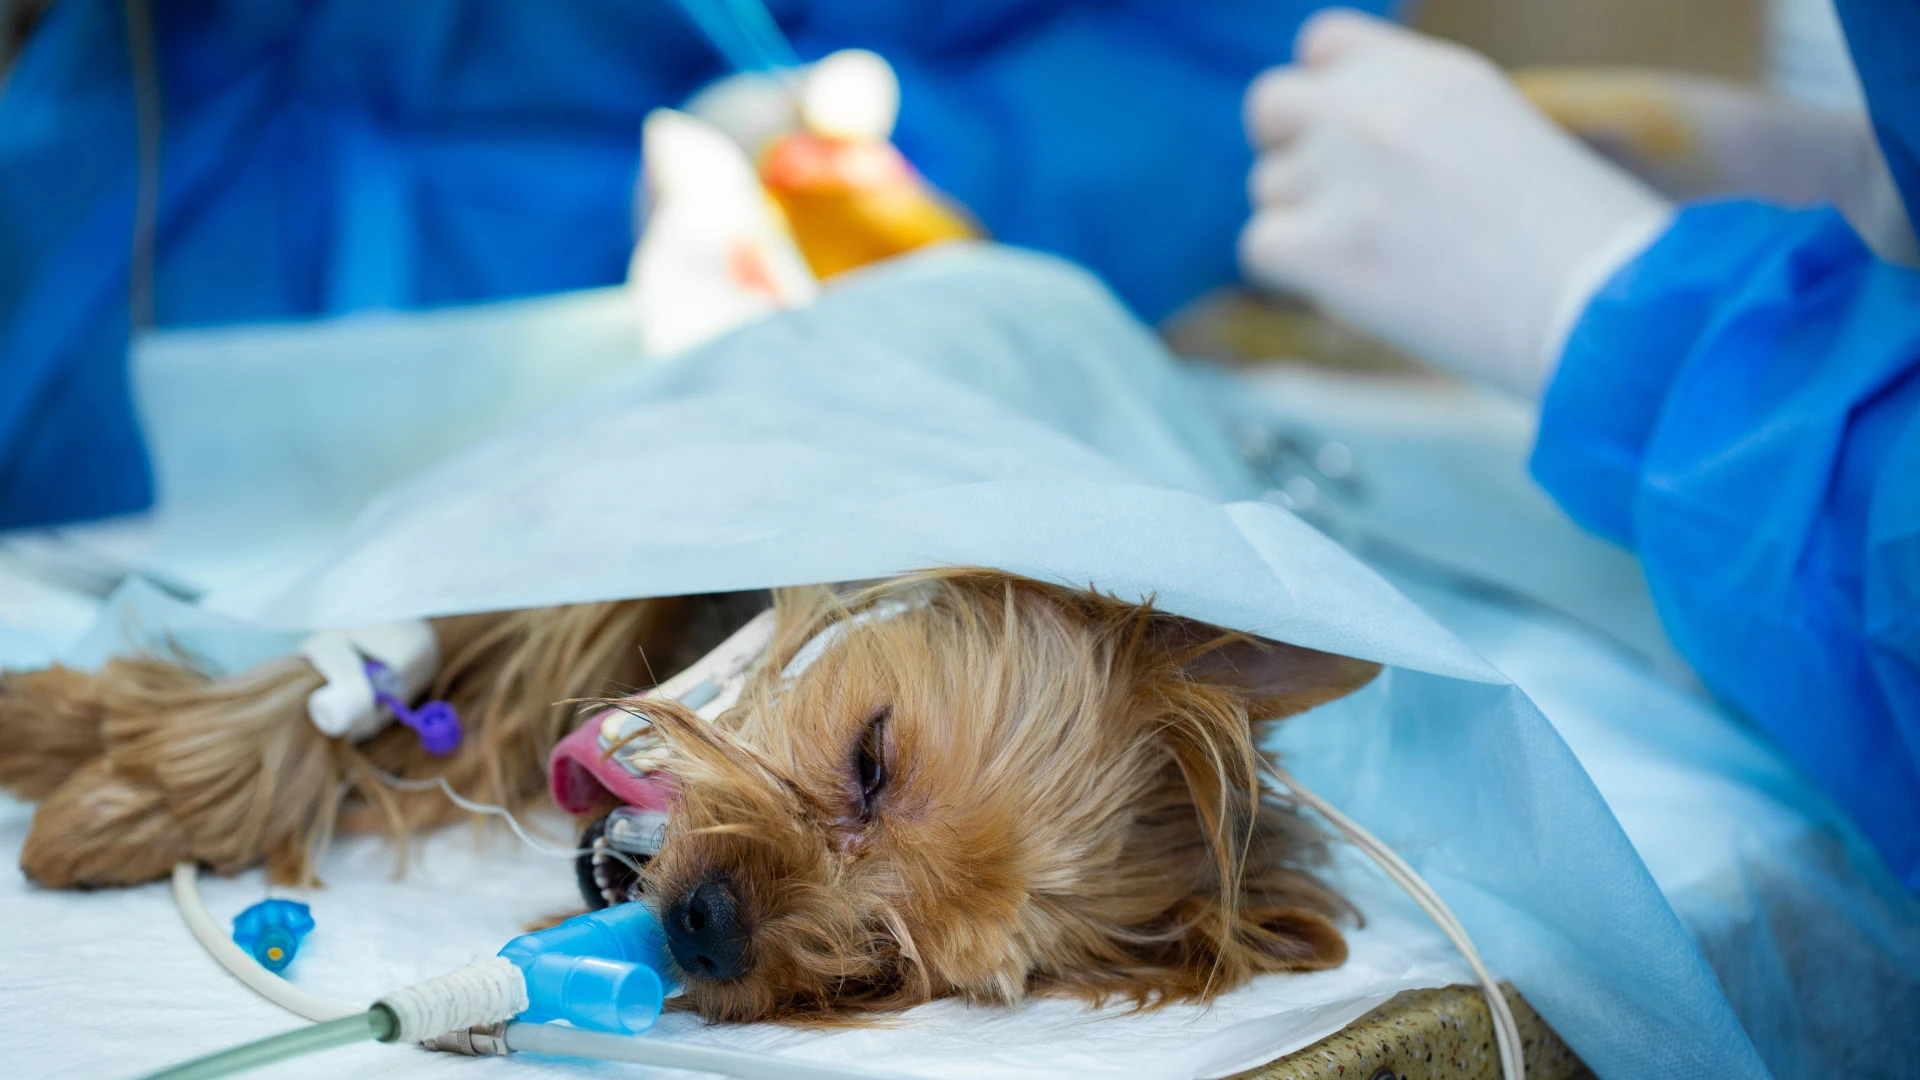 A Dog undergoing surgery in a Veterinary Clinic.